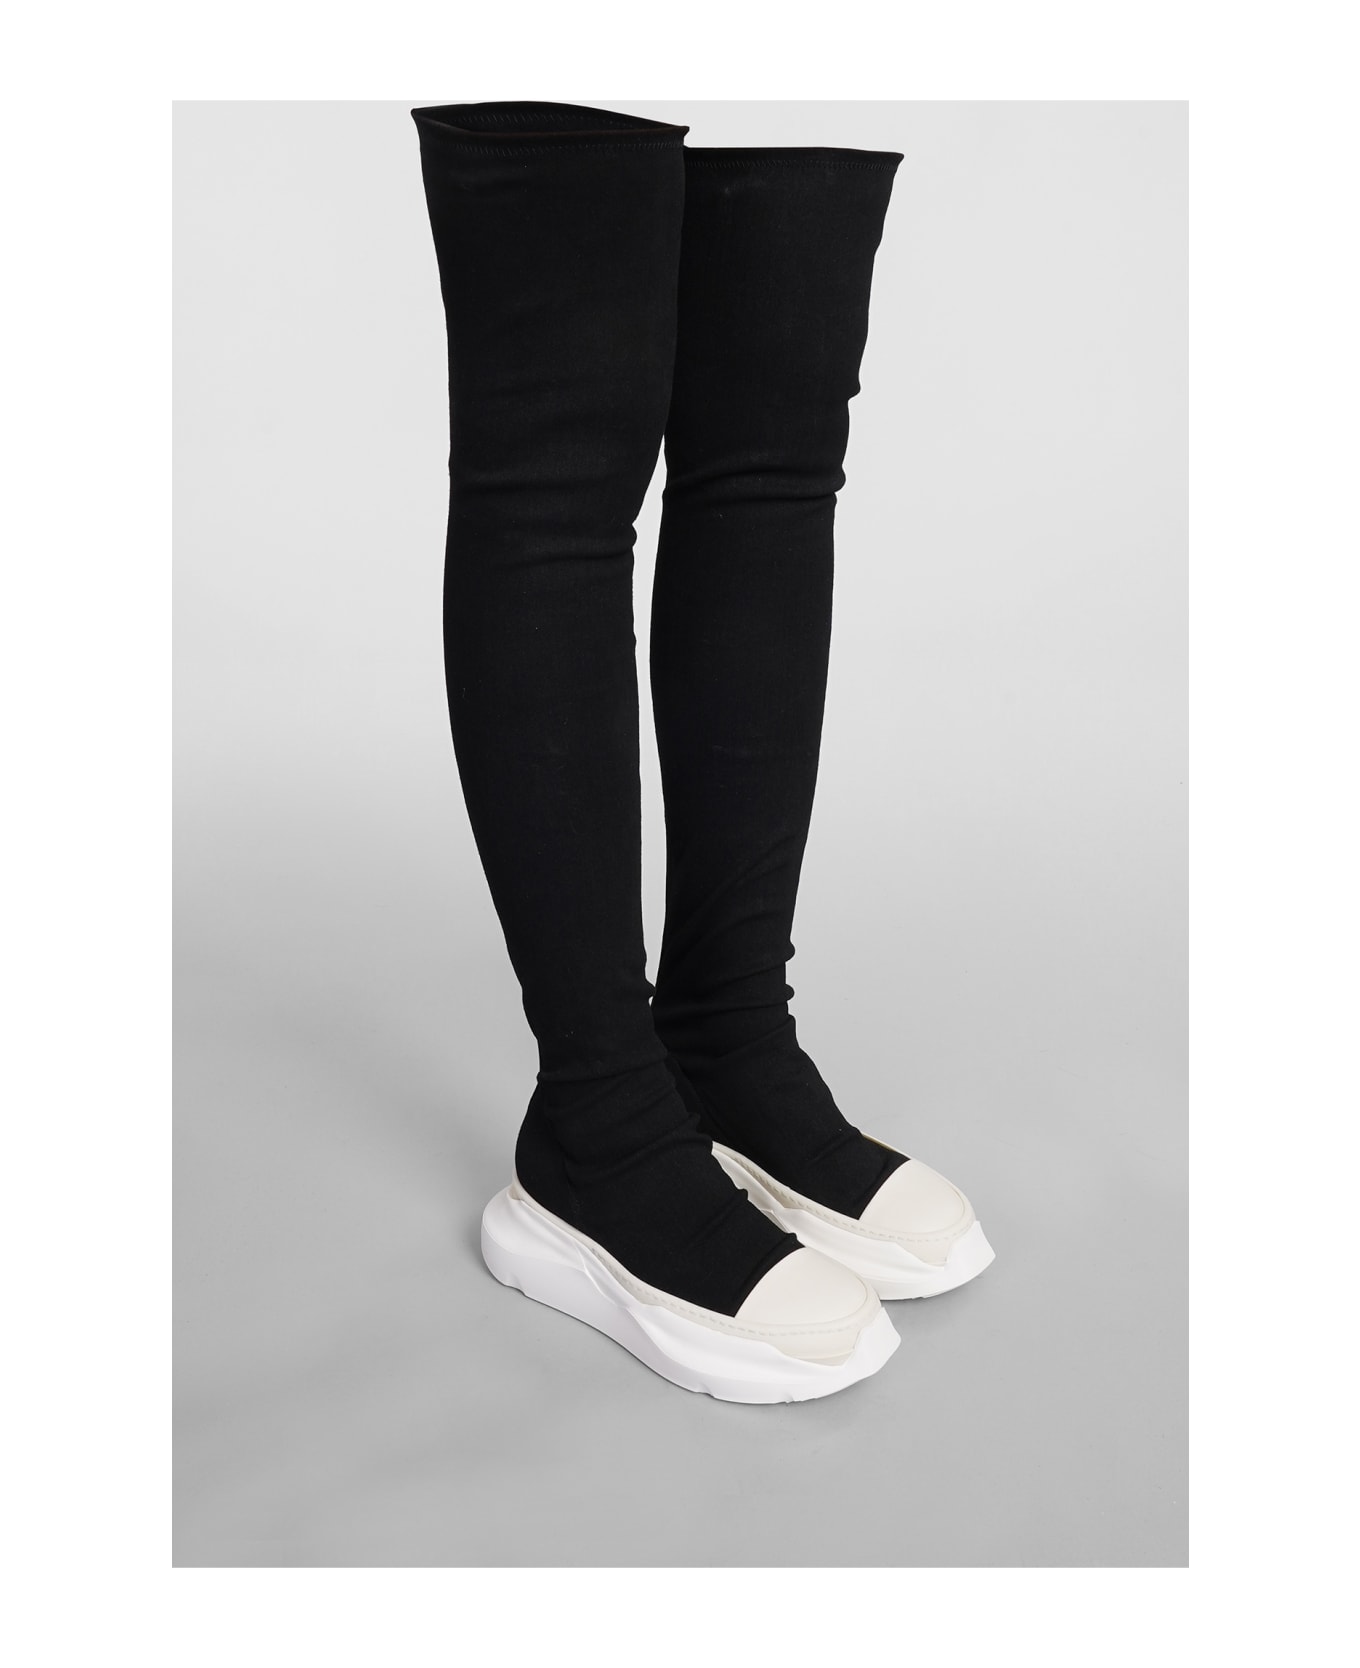 DRKSHDW Abstract Stockings Sneakers In Black Cotton - BLACK/WHITE